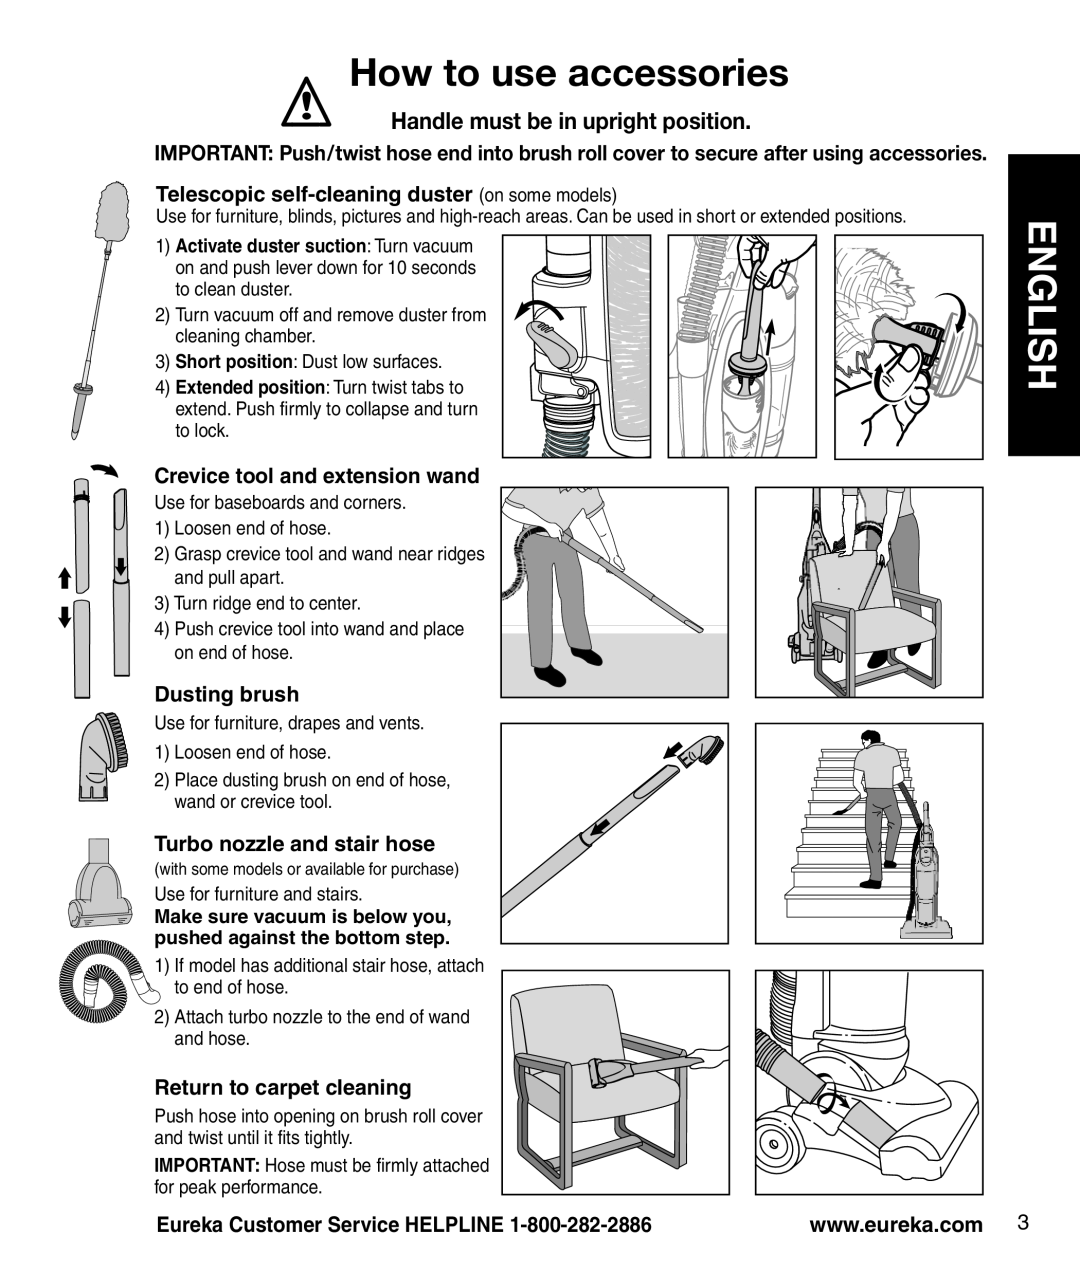 Eureka 4770 manual How to use accessories, Telescopic self-cleaning duster on some models, Crevice tool and extension wand 